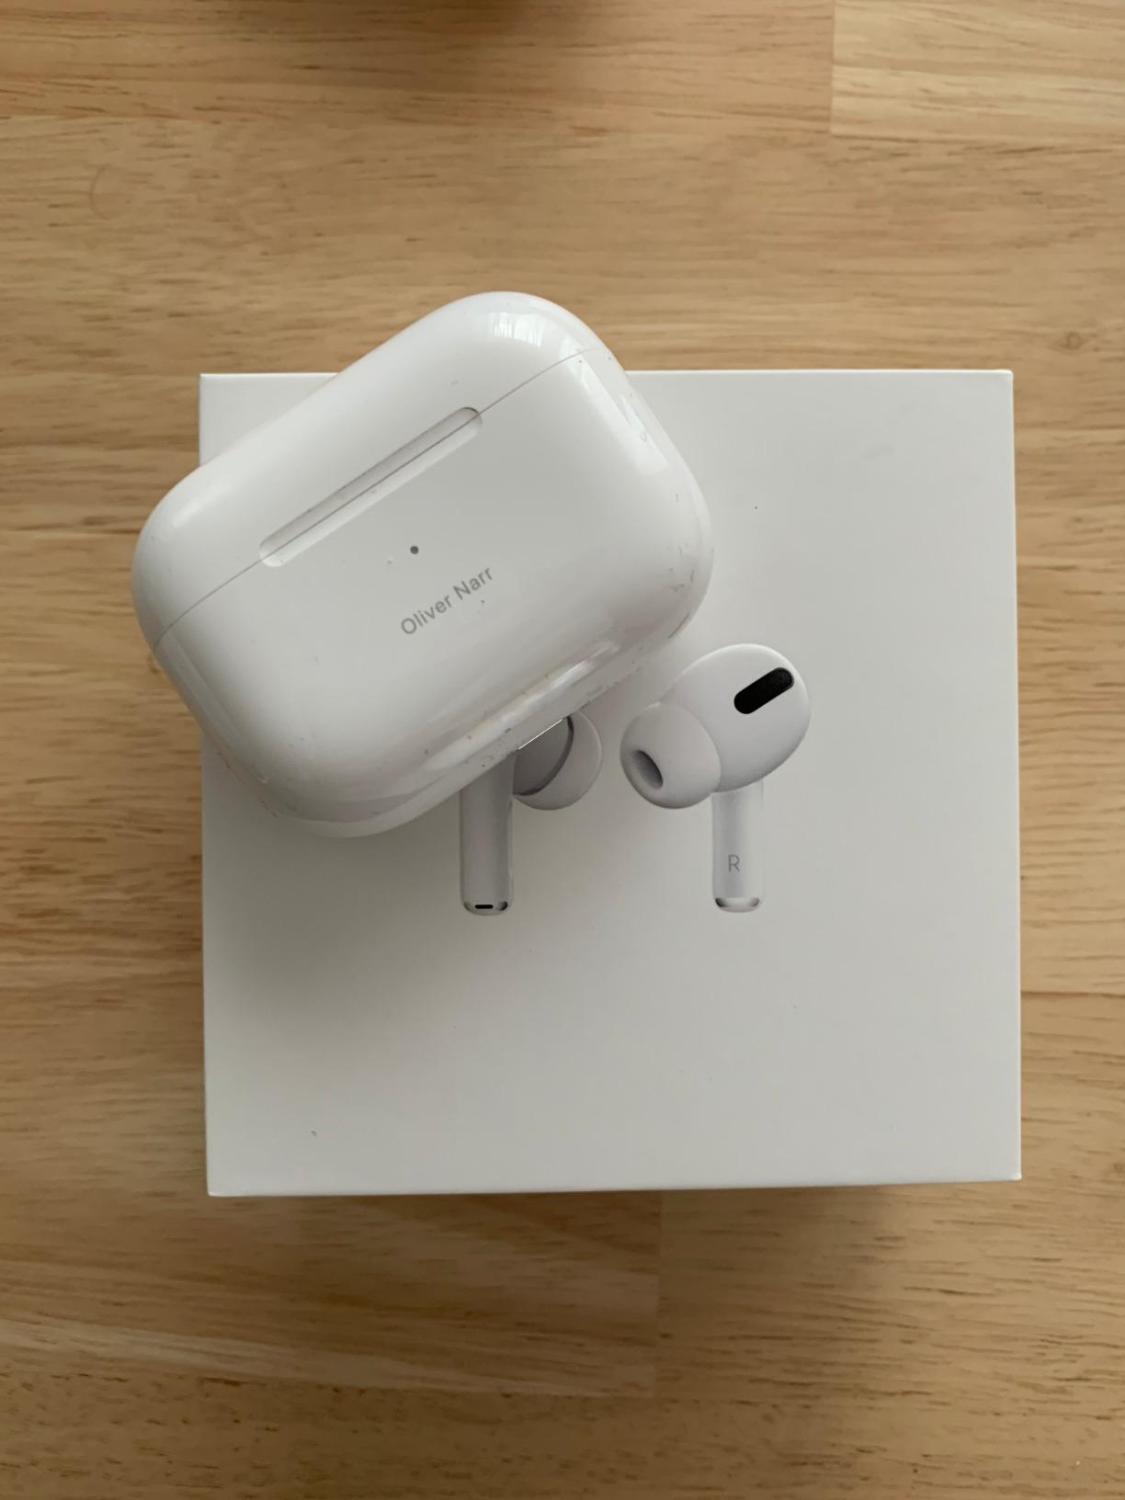 US 249.99 AirPods Pro